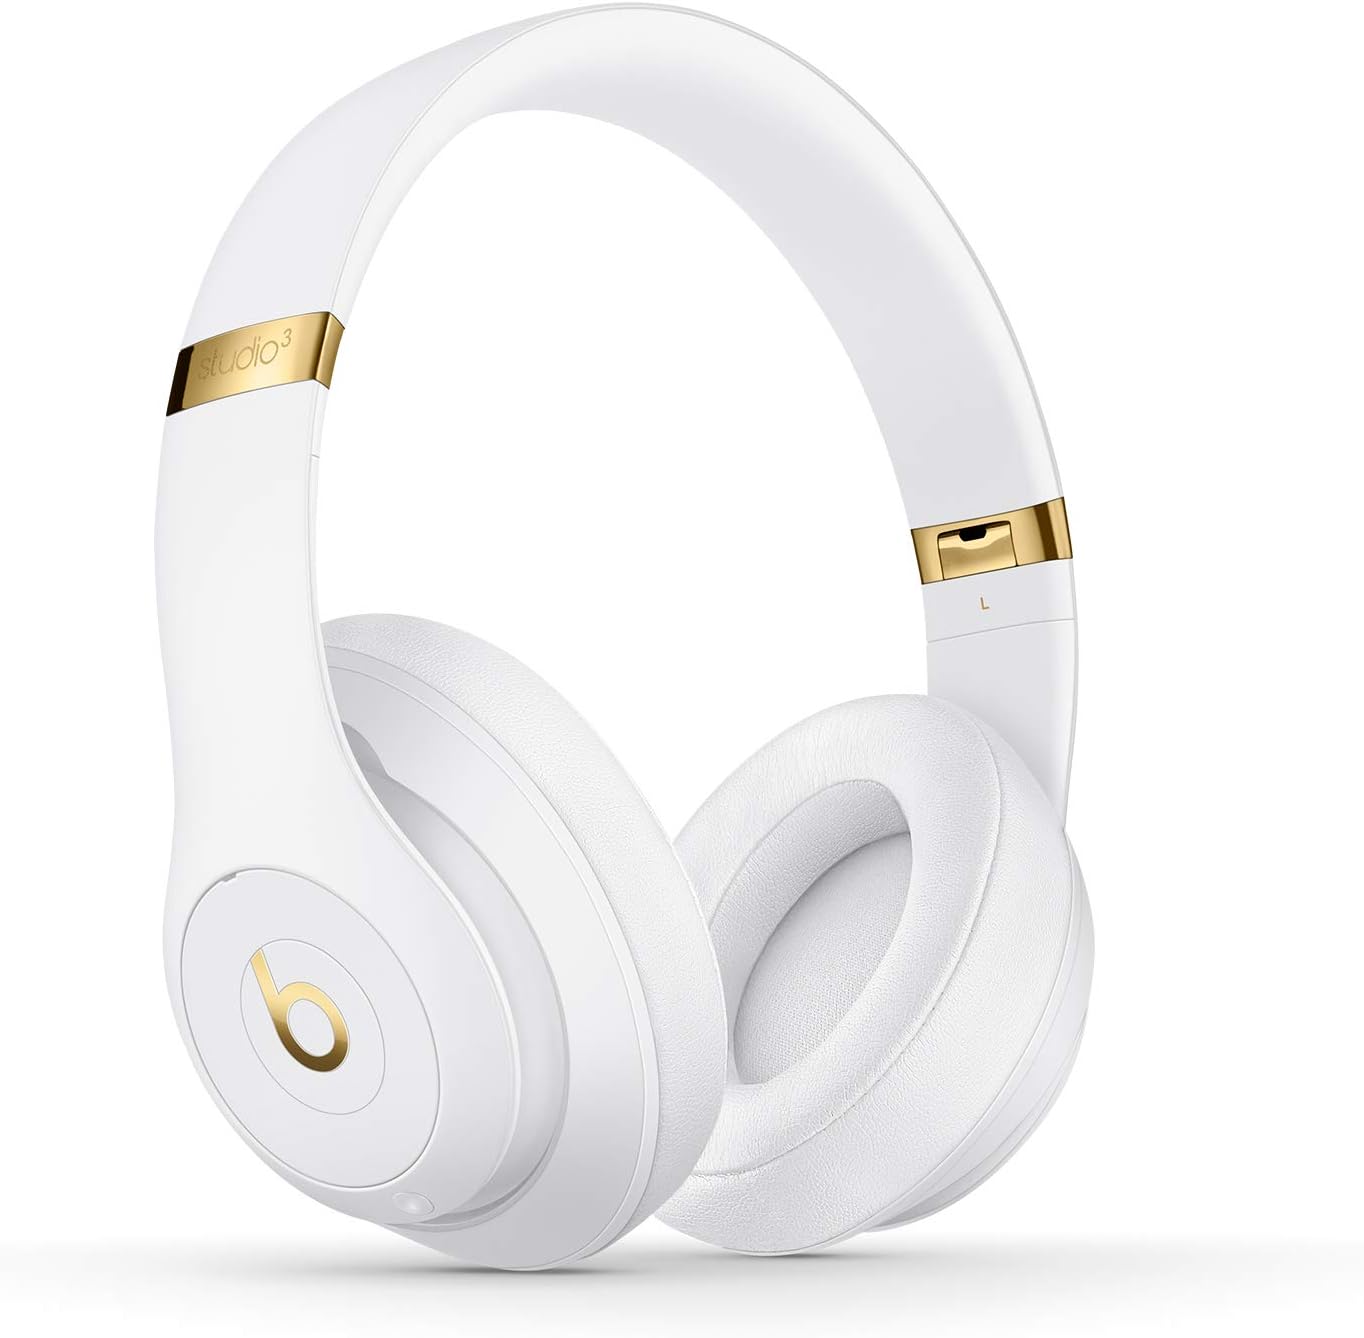 Beats Studio3 Wireless Noise Cancelling Over-Ear Headphones - Apple W1 Headphone Chip, Class 1 Bluetooth, Active Cancelling, 22 Hours Of Listening Time, Built-in Microphone White